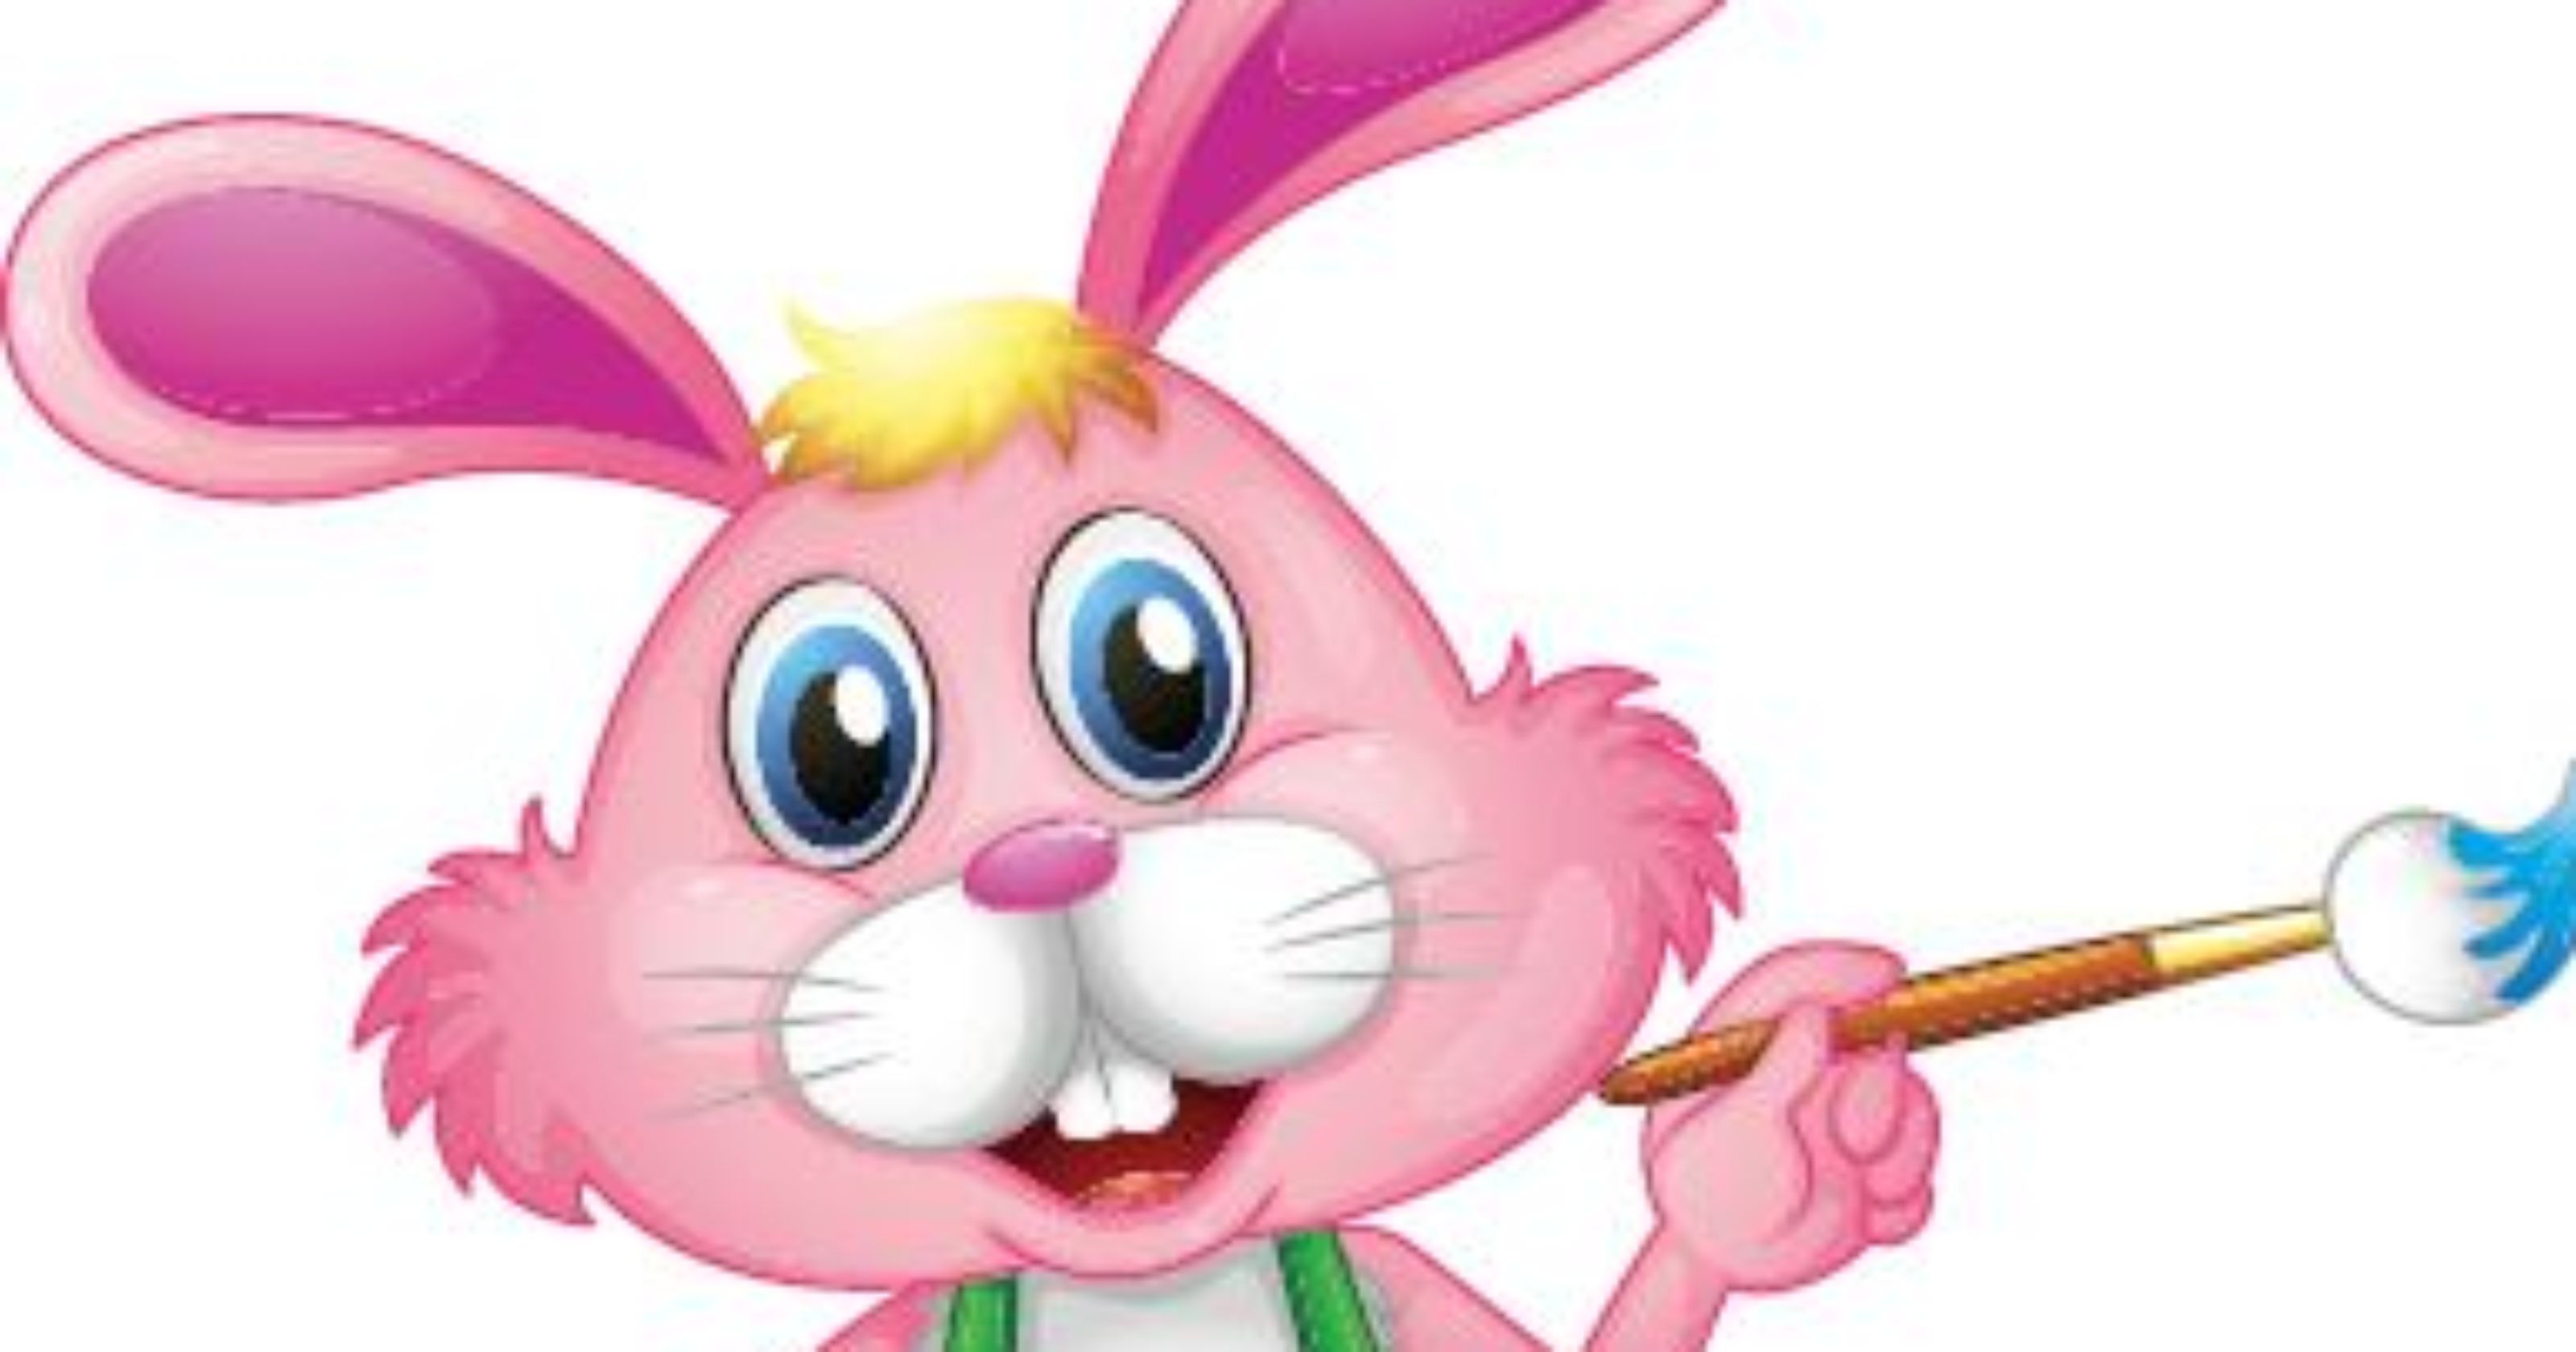 Easter Bunny plans eastern Iowa visits